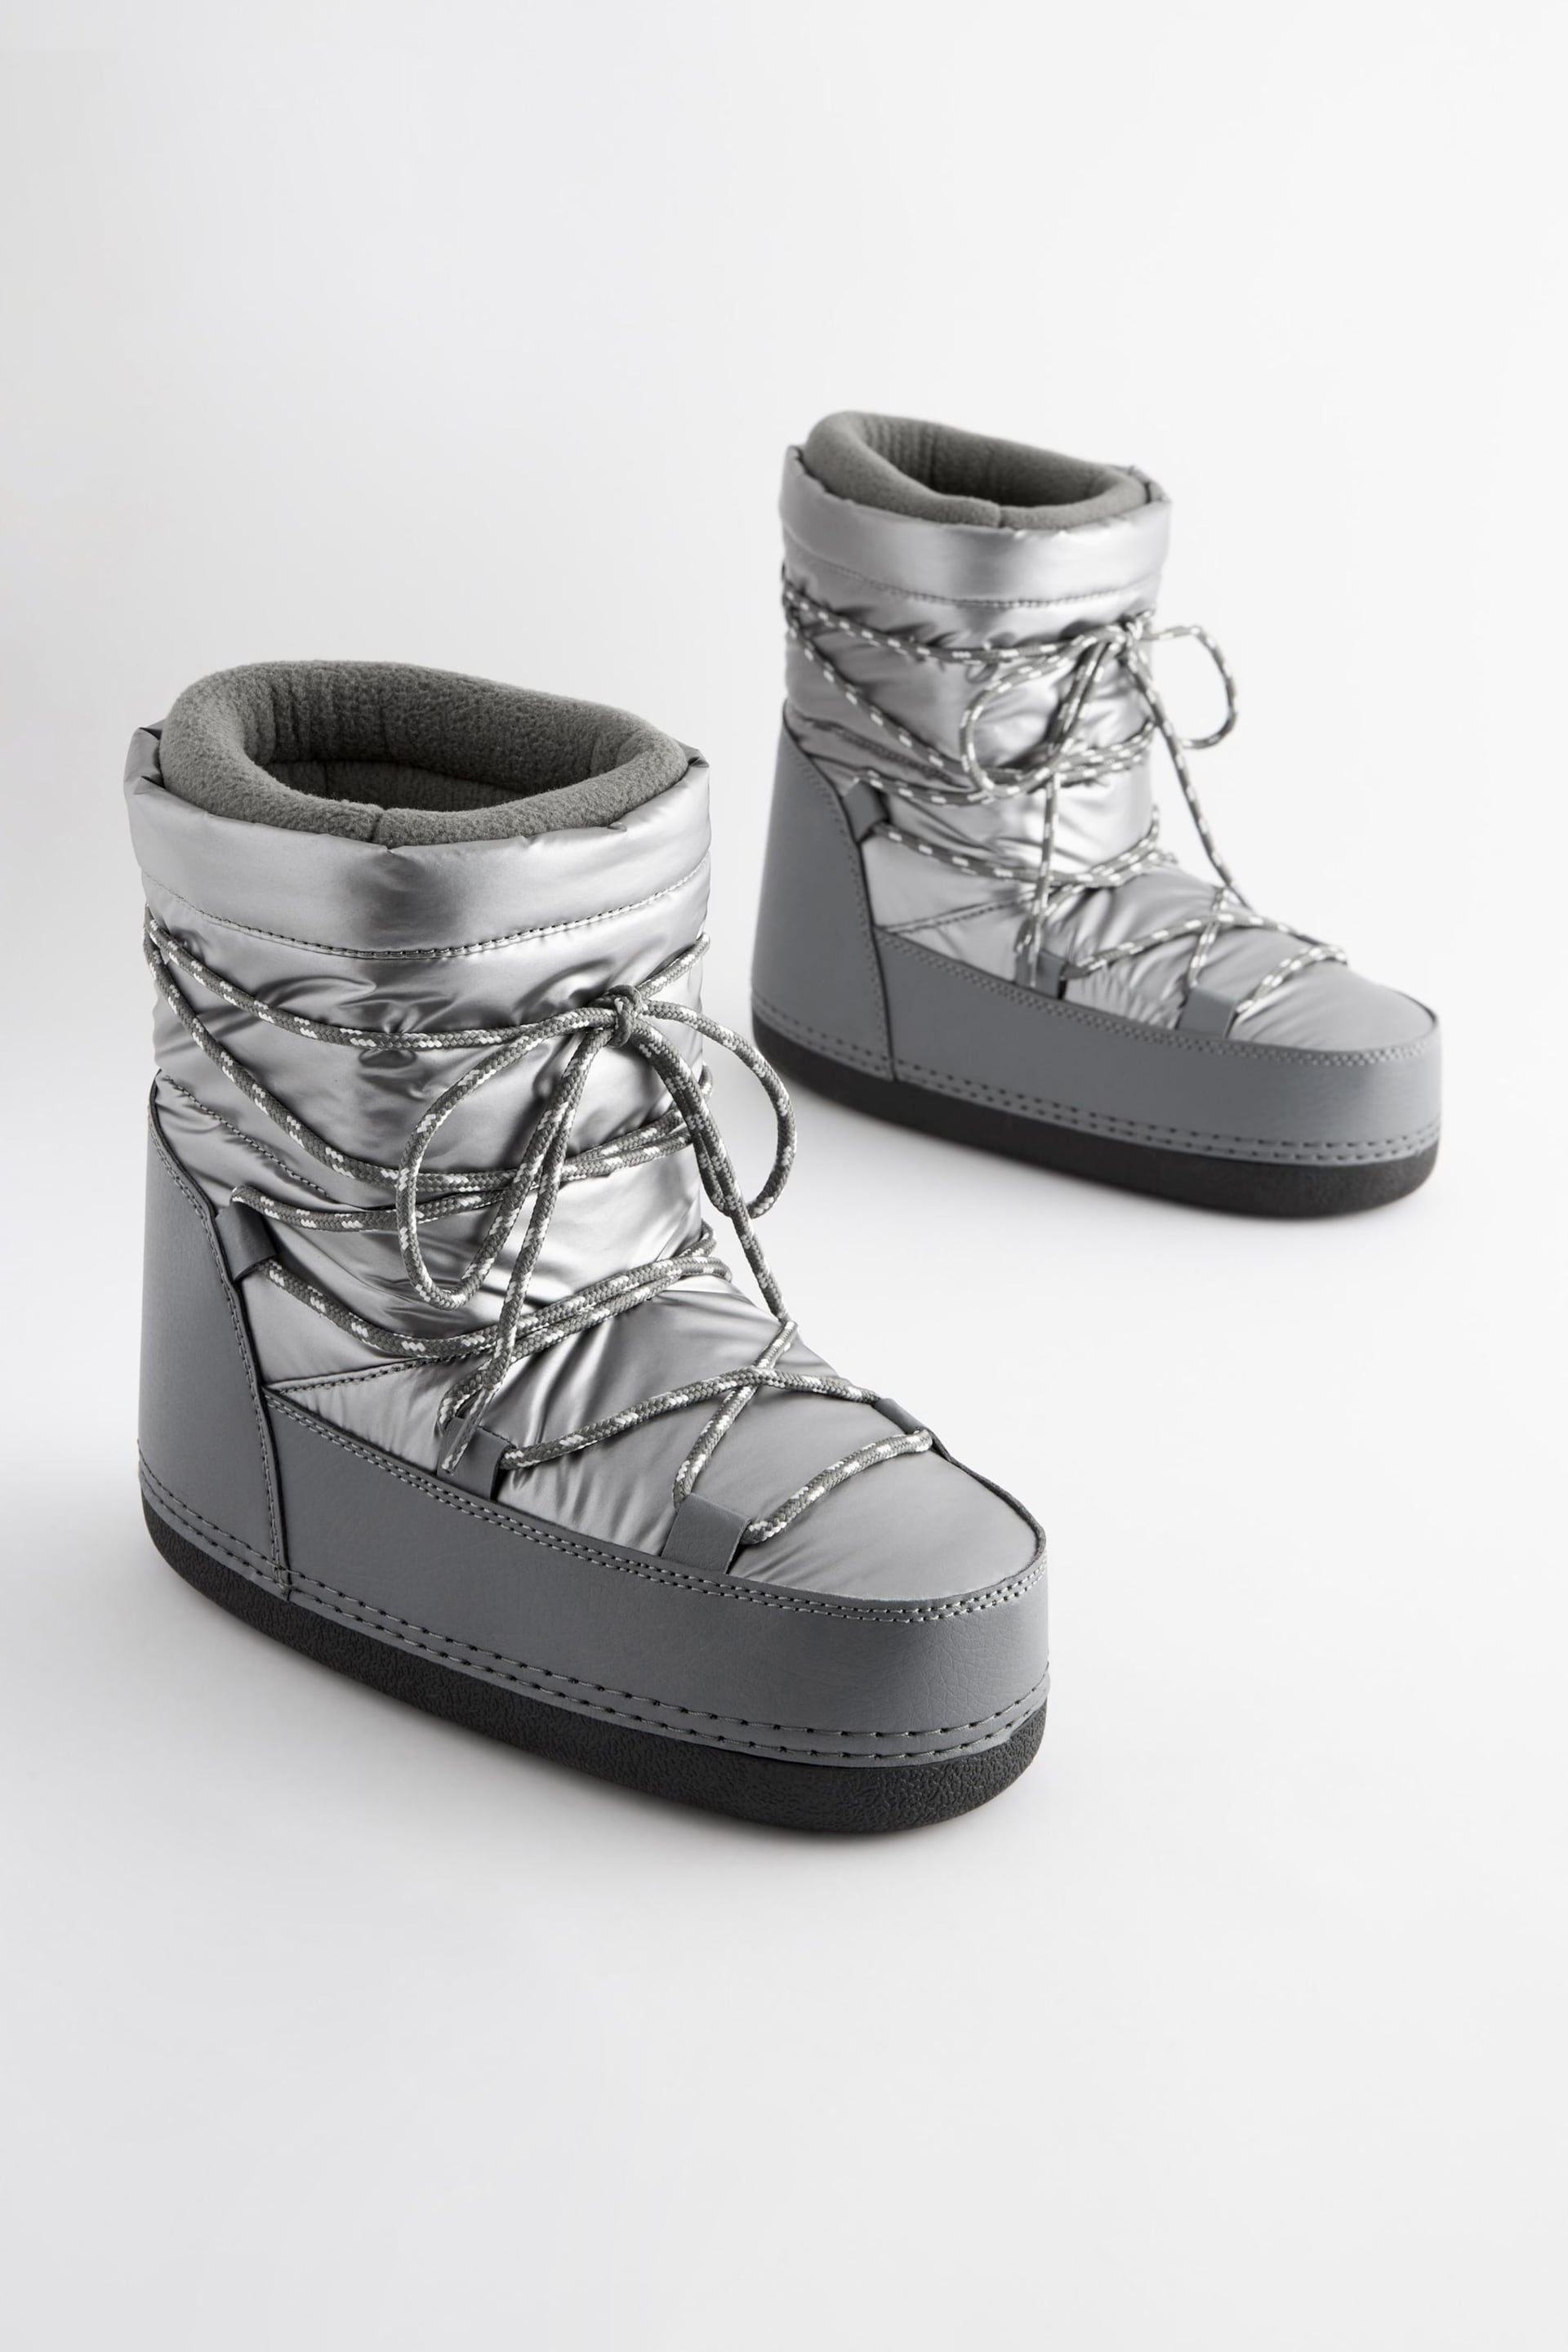 Silver Fashion Padded Boots - Image 5 of 10